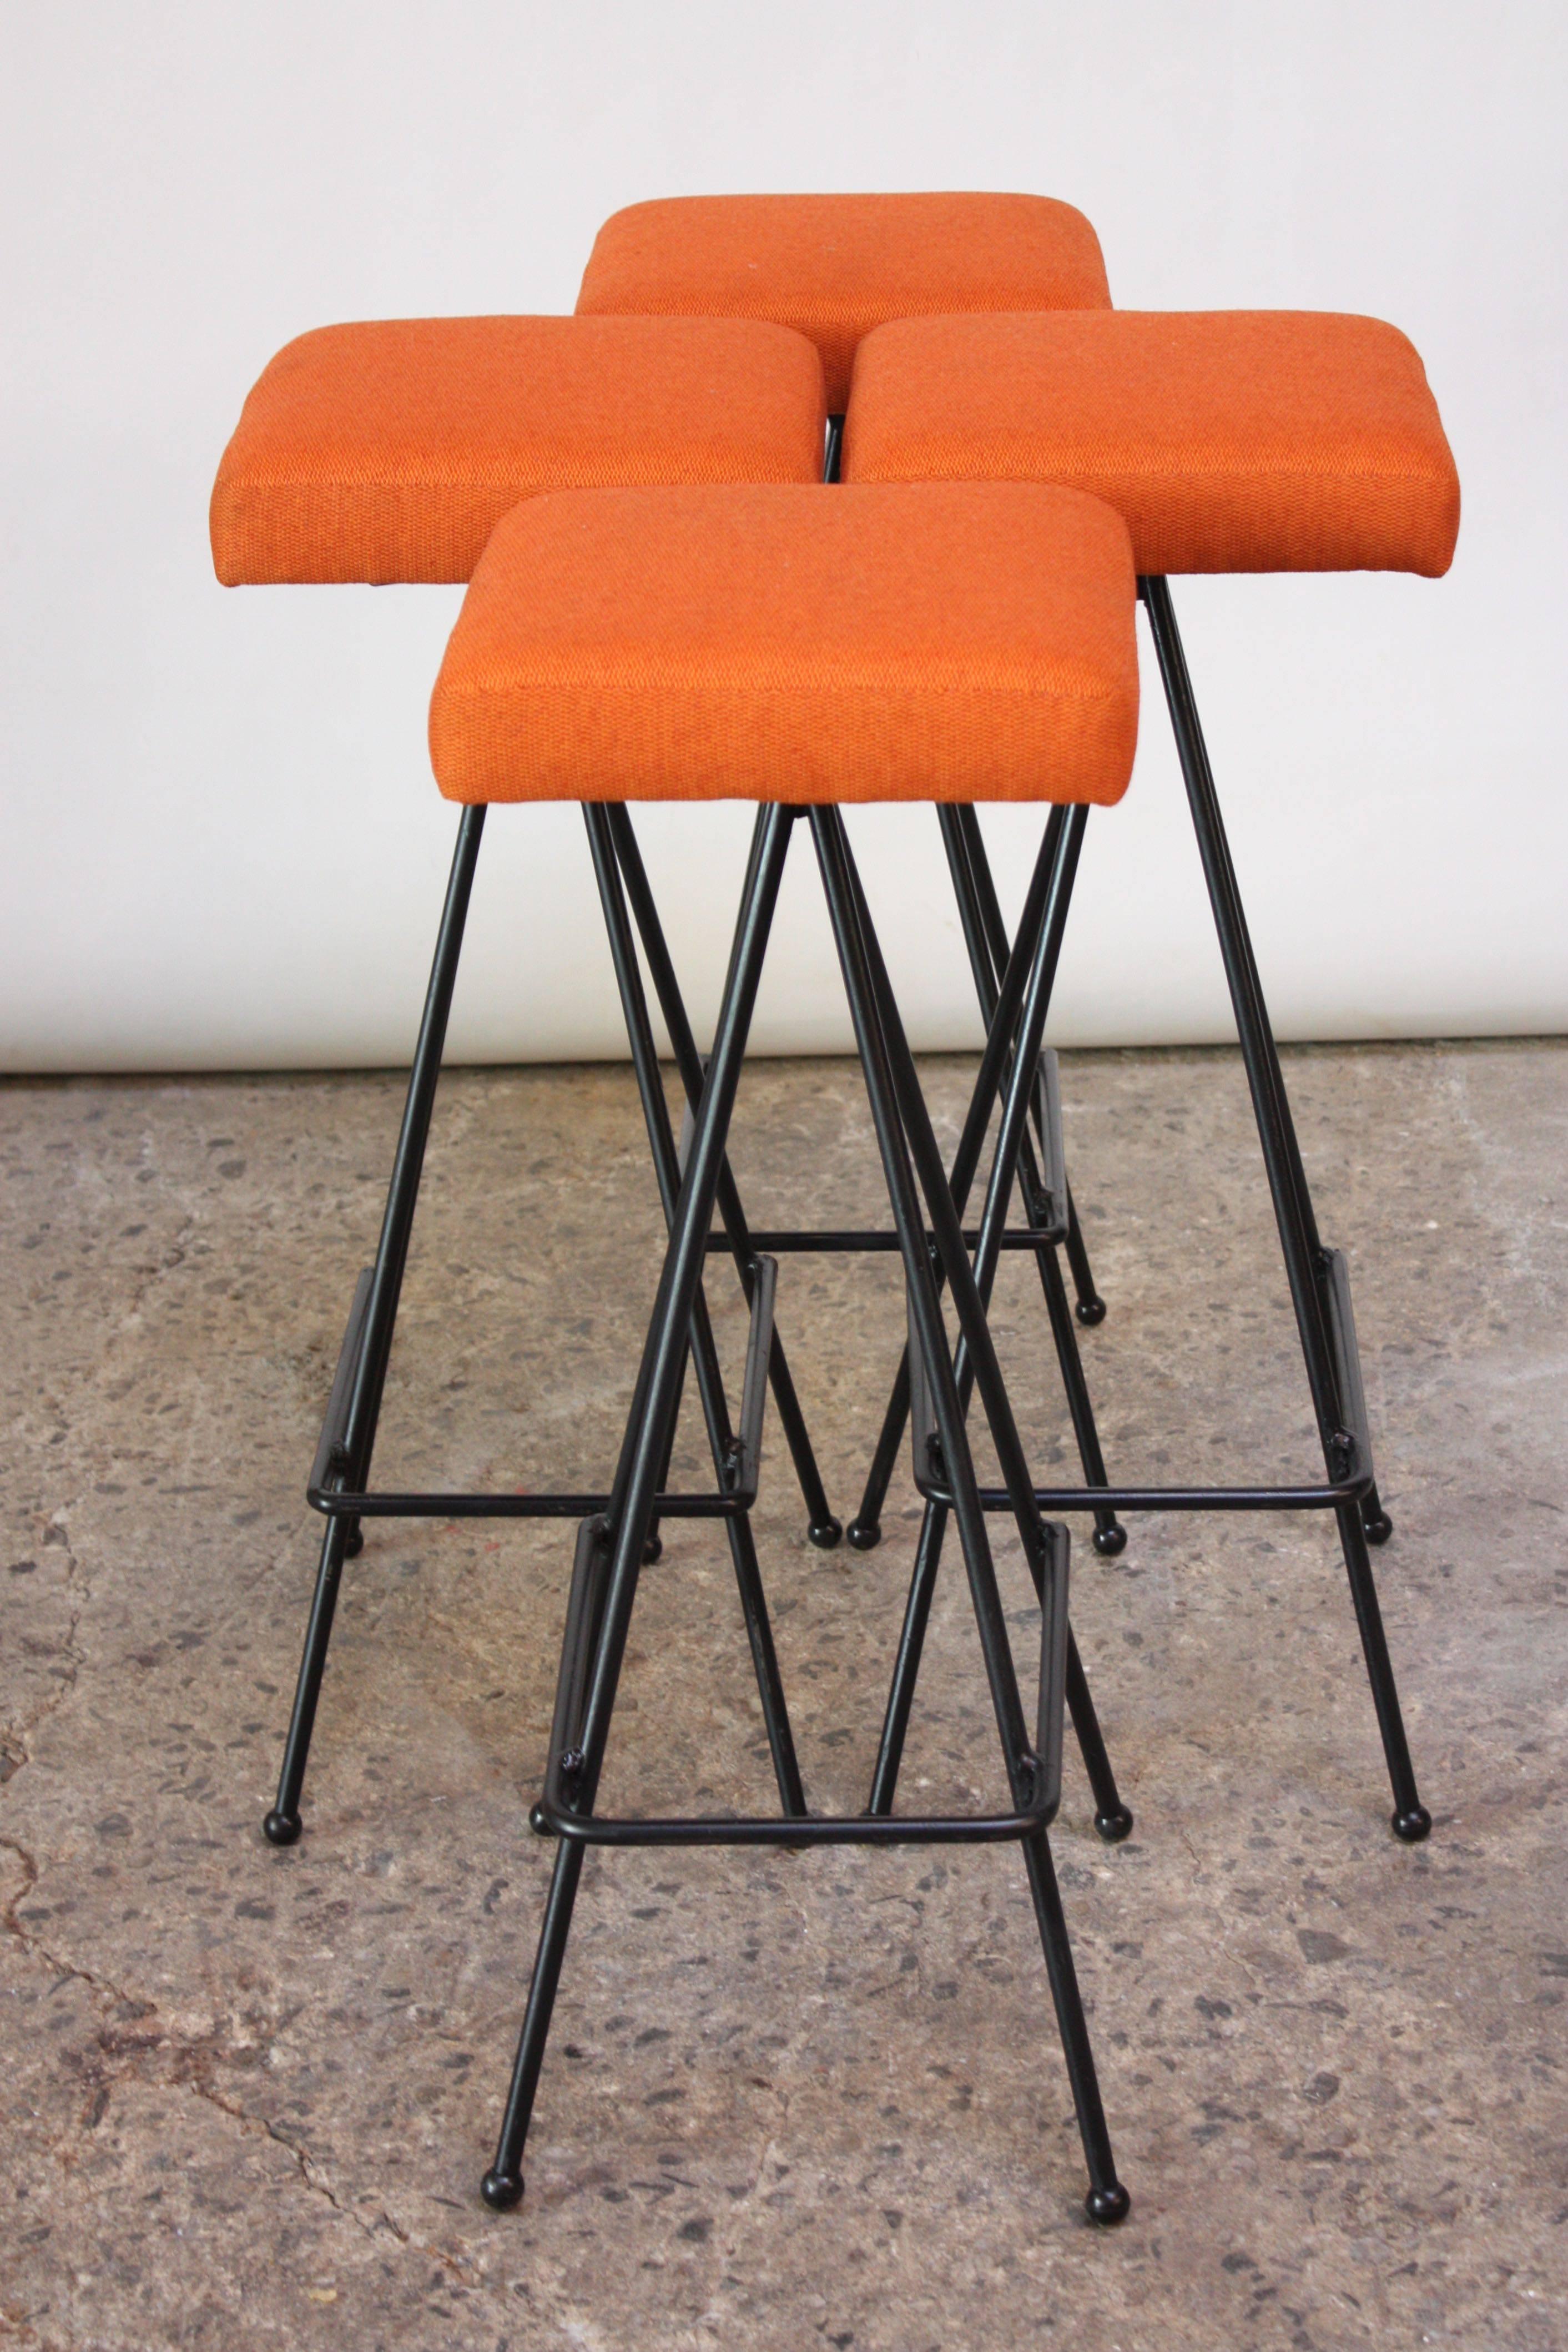 American Set of Four Adrian Pearsall #11 Iron Barstools